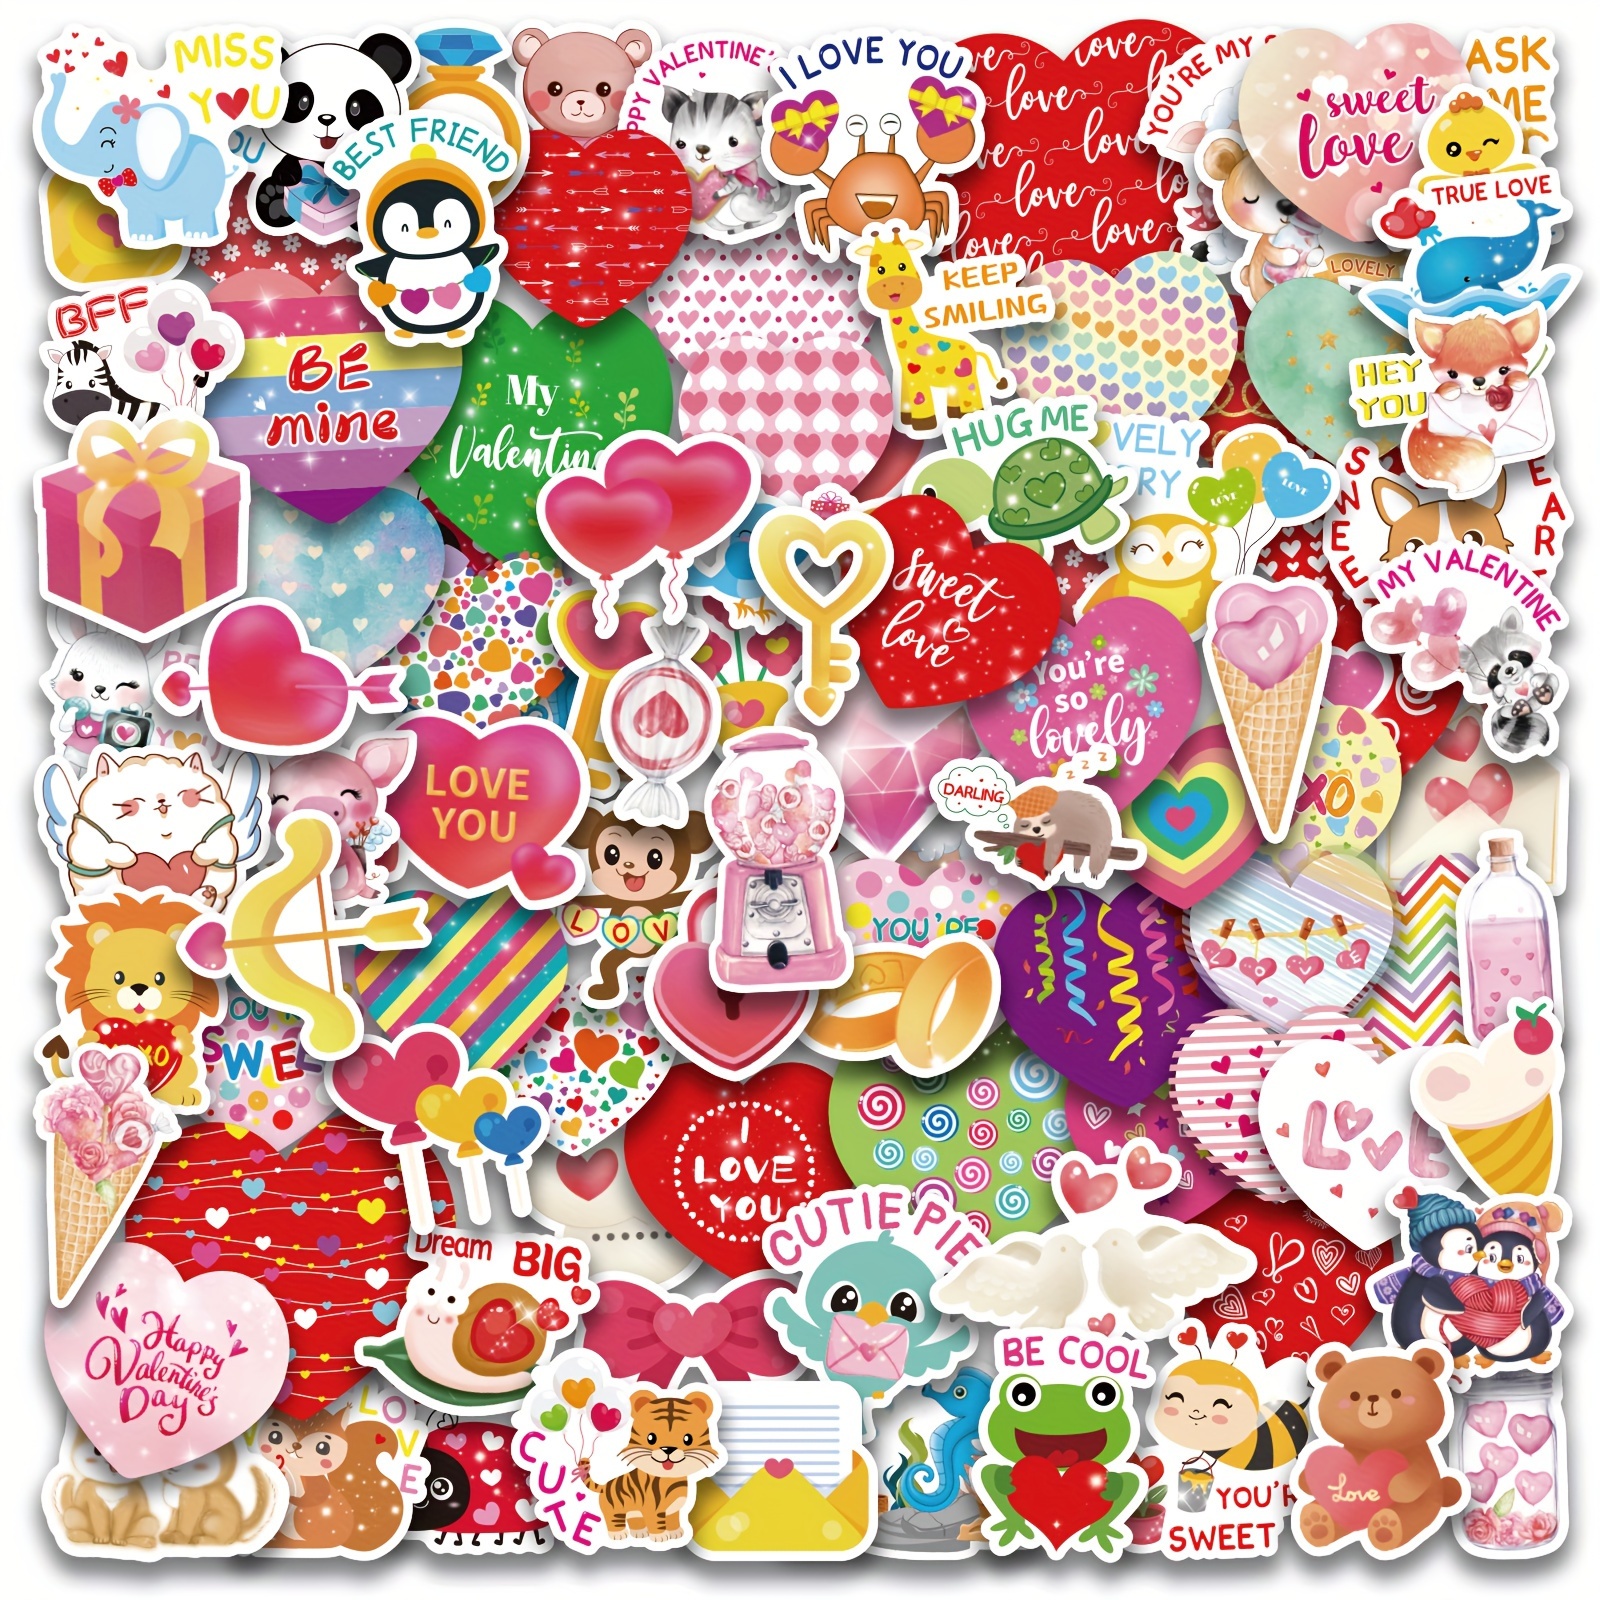 Love Hearts Valentine's Day Stickers Love Heart Stickers Scrapbook Stickers  Outdoor Stickers Water Resistant High Quality 